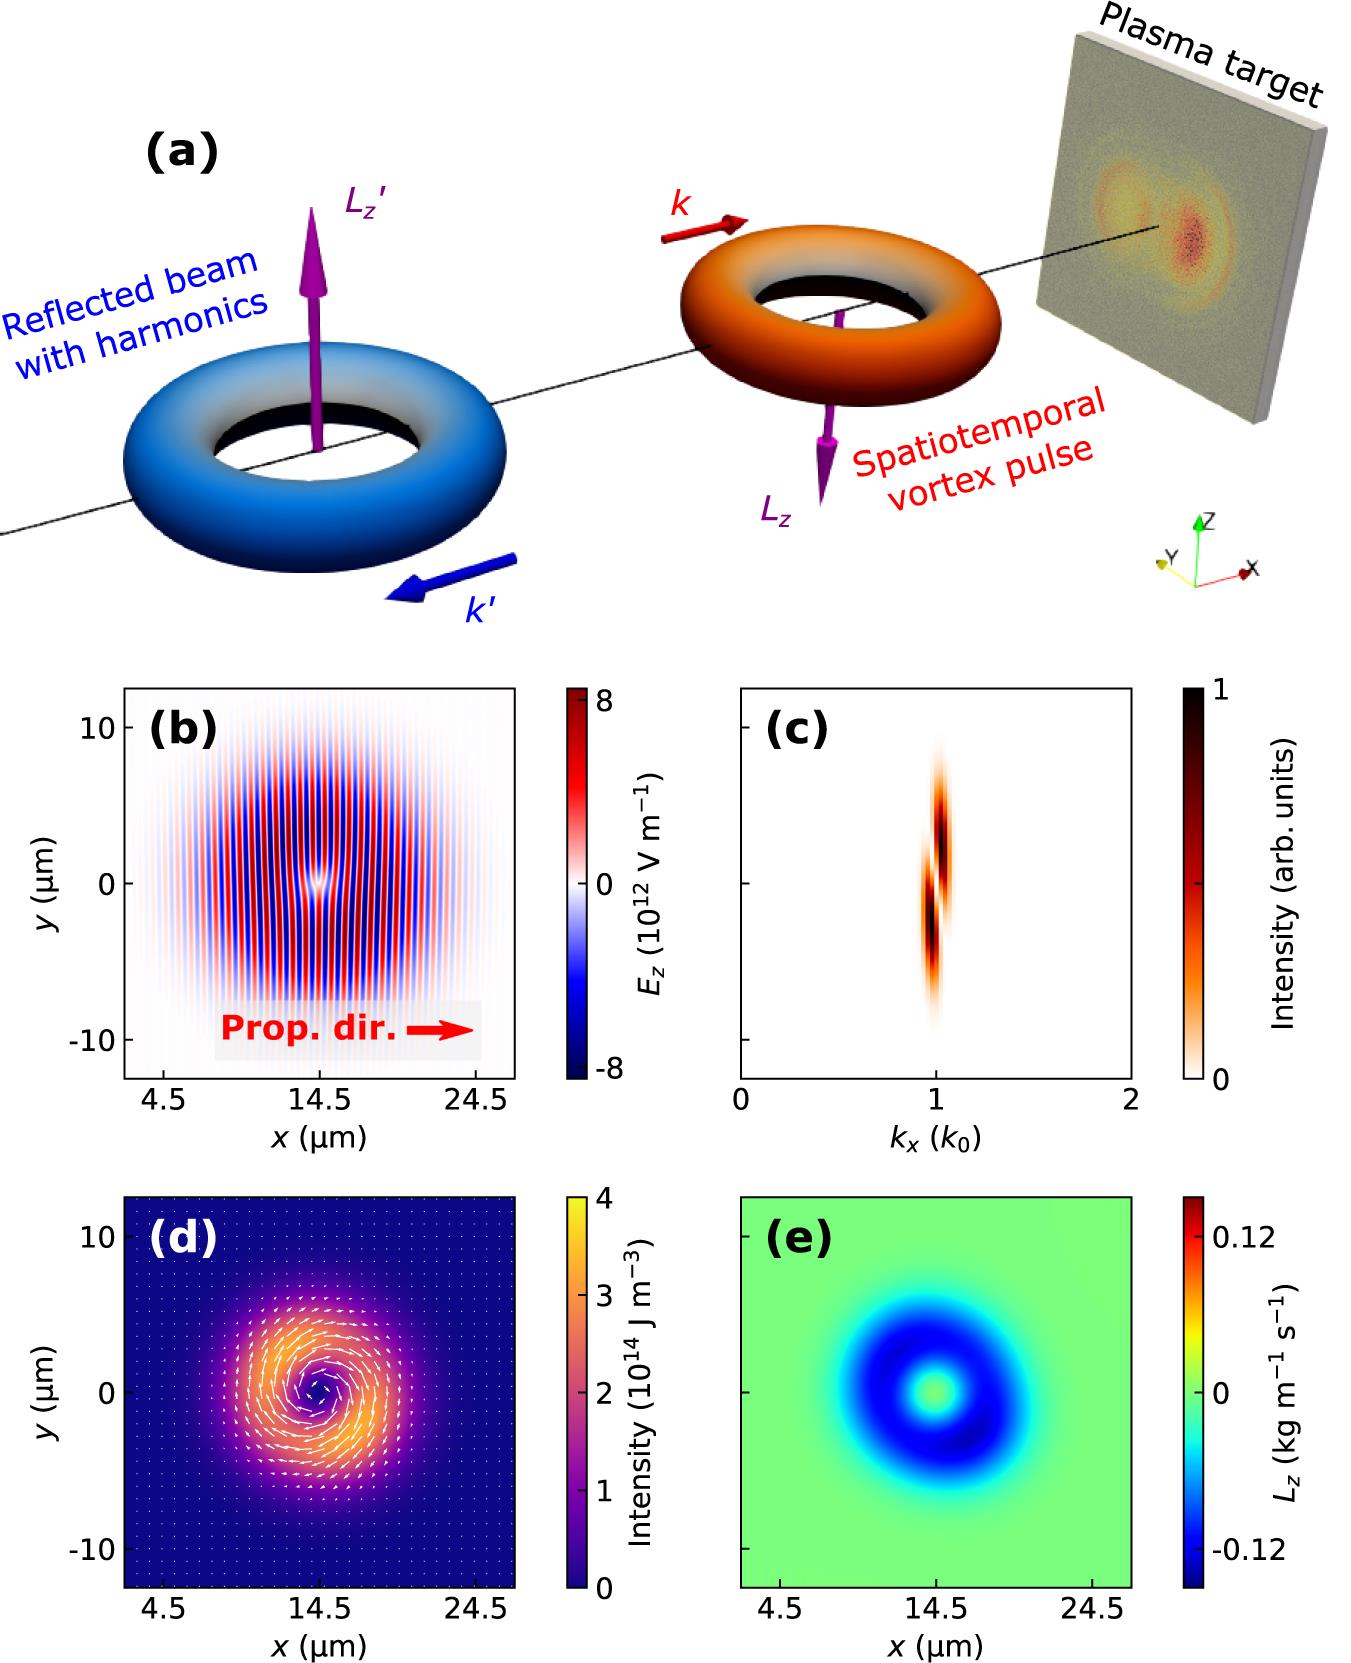 (a) Schematic of proposed setup. A linearly -polarized spatiotemporal optical vortex (STOV, red torus) pulse with purely transverse orbital angular momentum (TOAM) is incident onto a solid plasma target. Harmonics can be generated in the reflected beam (blue torus). (b) Snapshots of electric field at . (c) Frequency spectrum of (b) generated by performing Fourier transform in the -direction. (d) Time-averaged energy density of the STOV beam. The overlaid white arrows represent the circulated momentum flux. (e) TOAM density with the subtracted propagation term. The red arrow in (b) shows the beam-propagating direction.